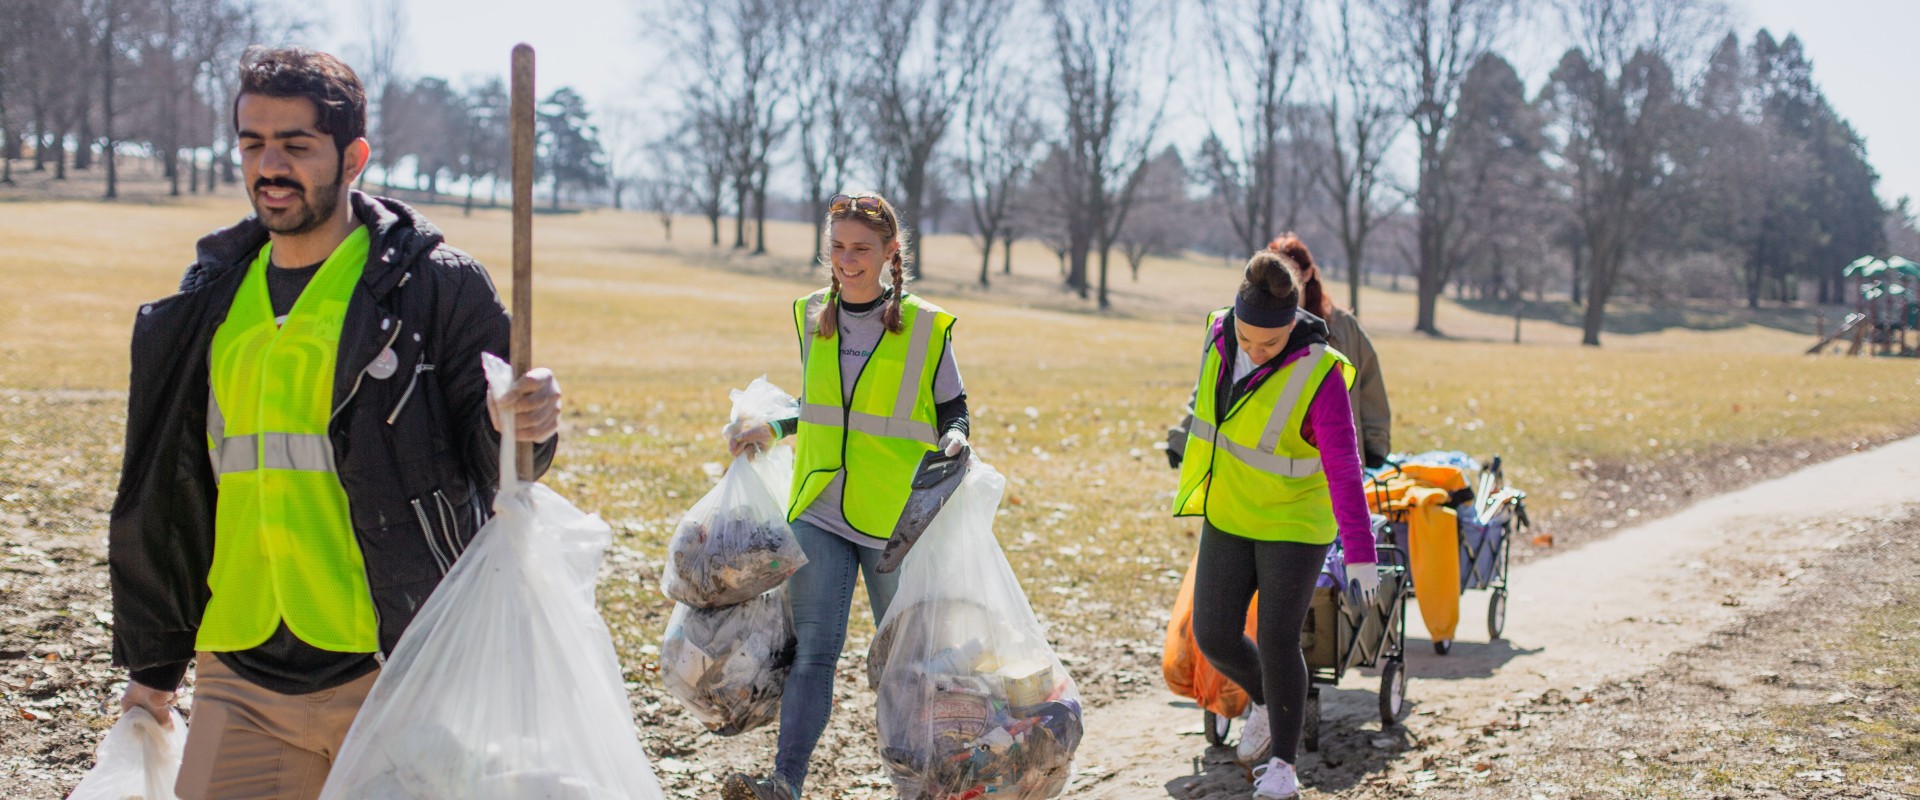 Volunteer in Omaha, Nebraska: Make a Difference in Your Community